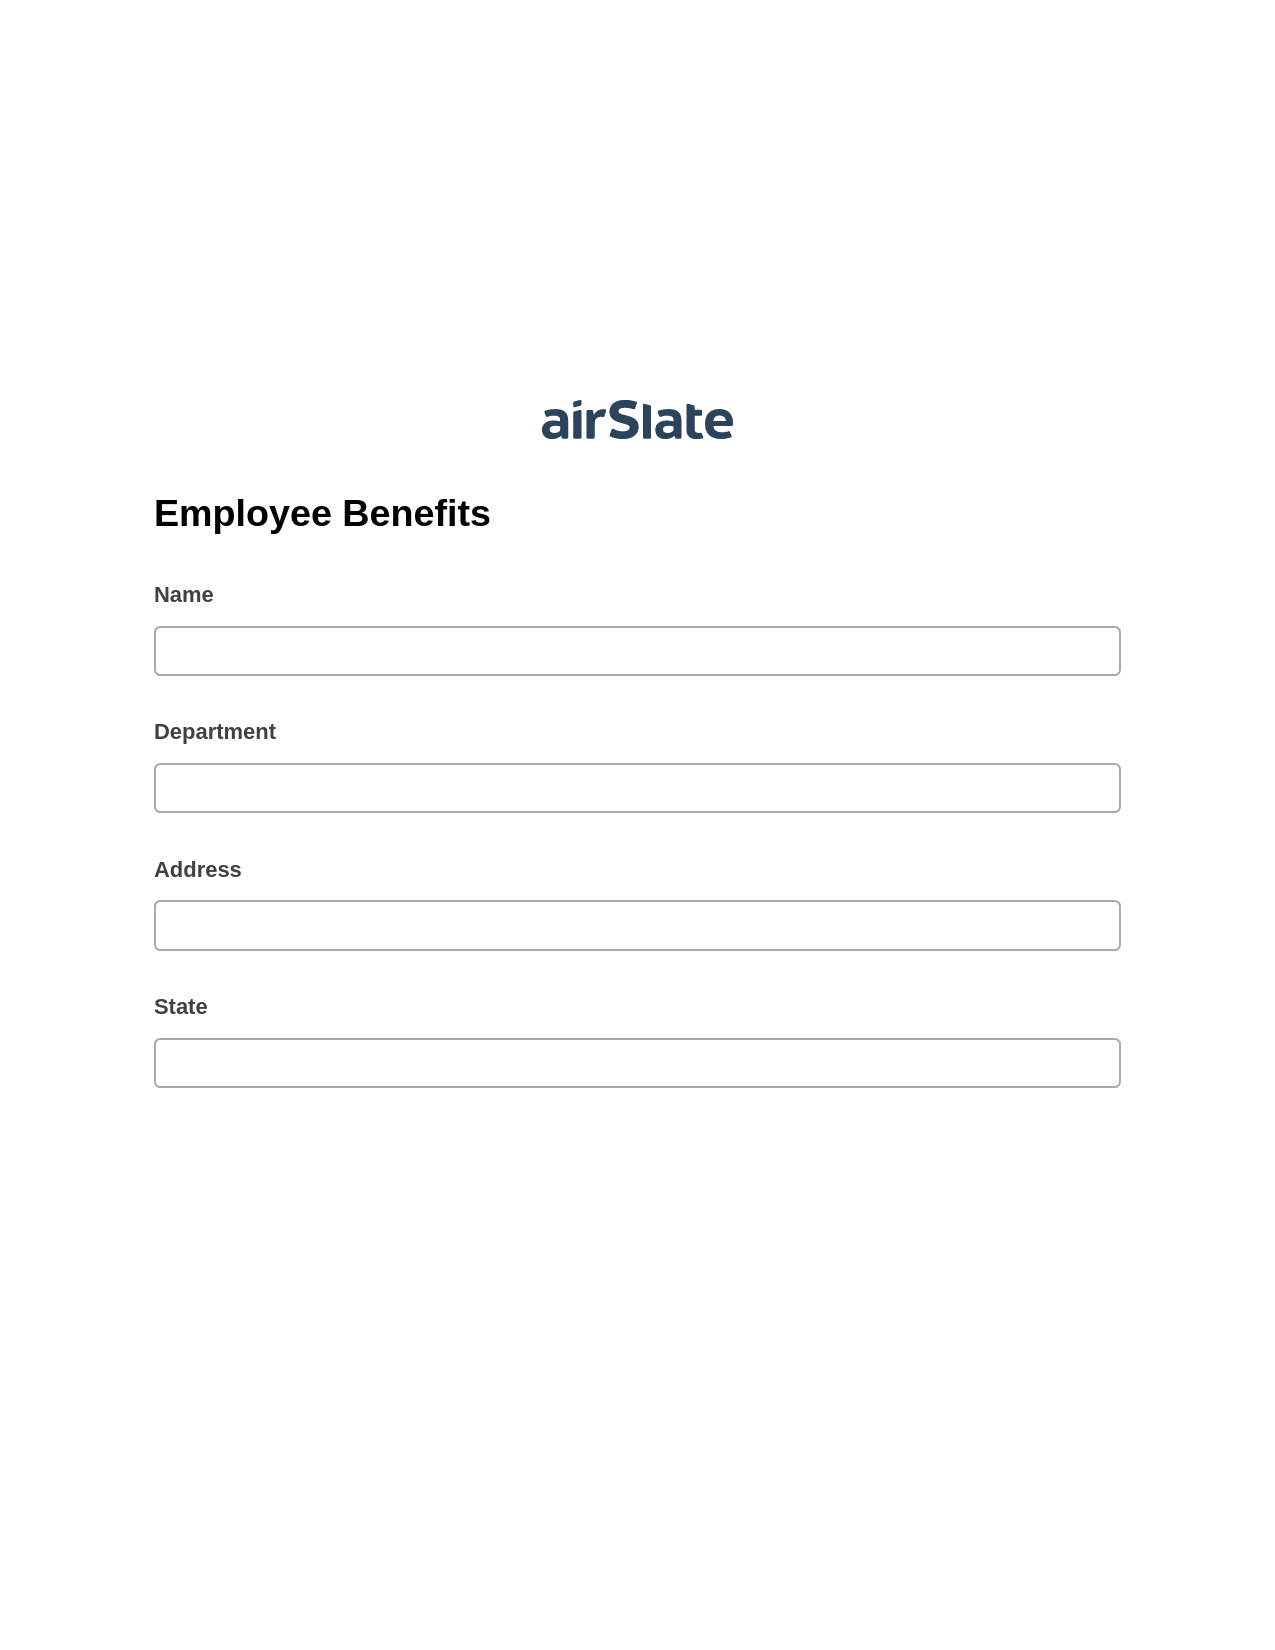 Employee Benefits Pre-fill from CSV File Bot, Update NetSuite Records Bot, Archive to SharePoint Folder Bot